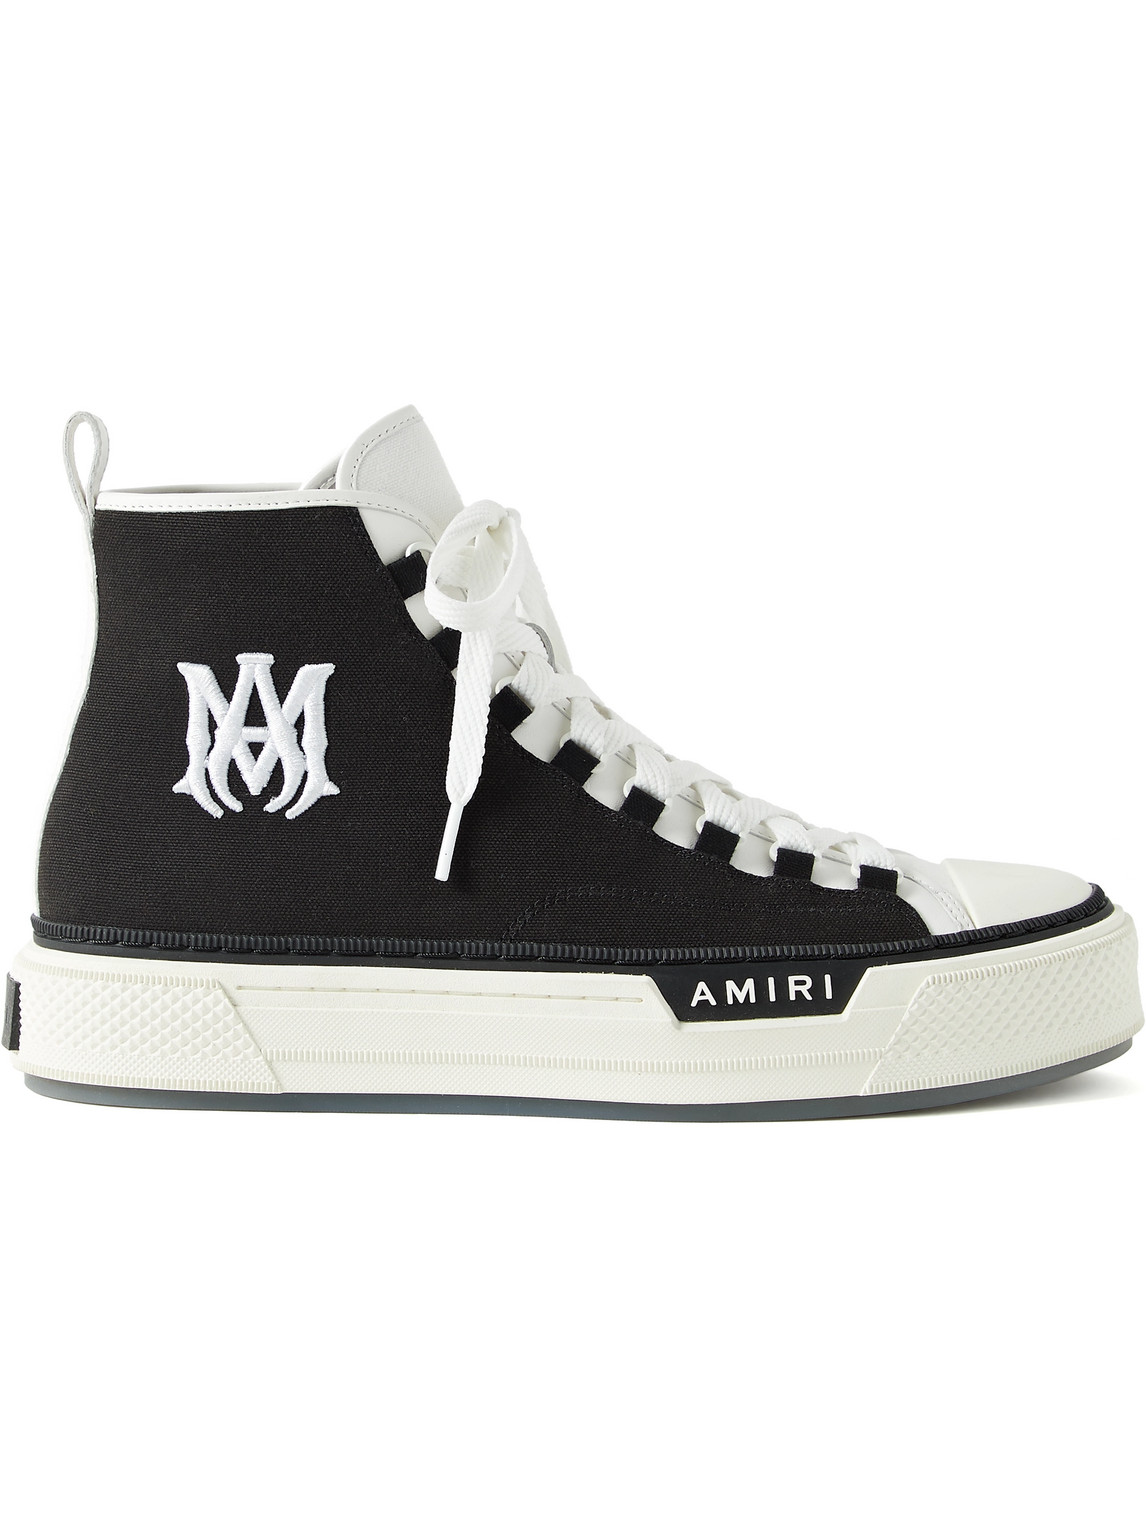 MA Court Leather-Trimmed Canvas High-Top Sneakers